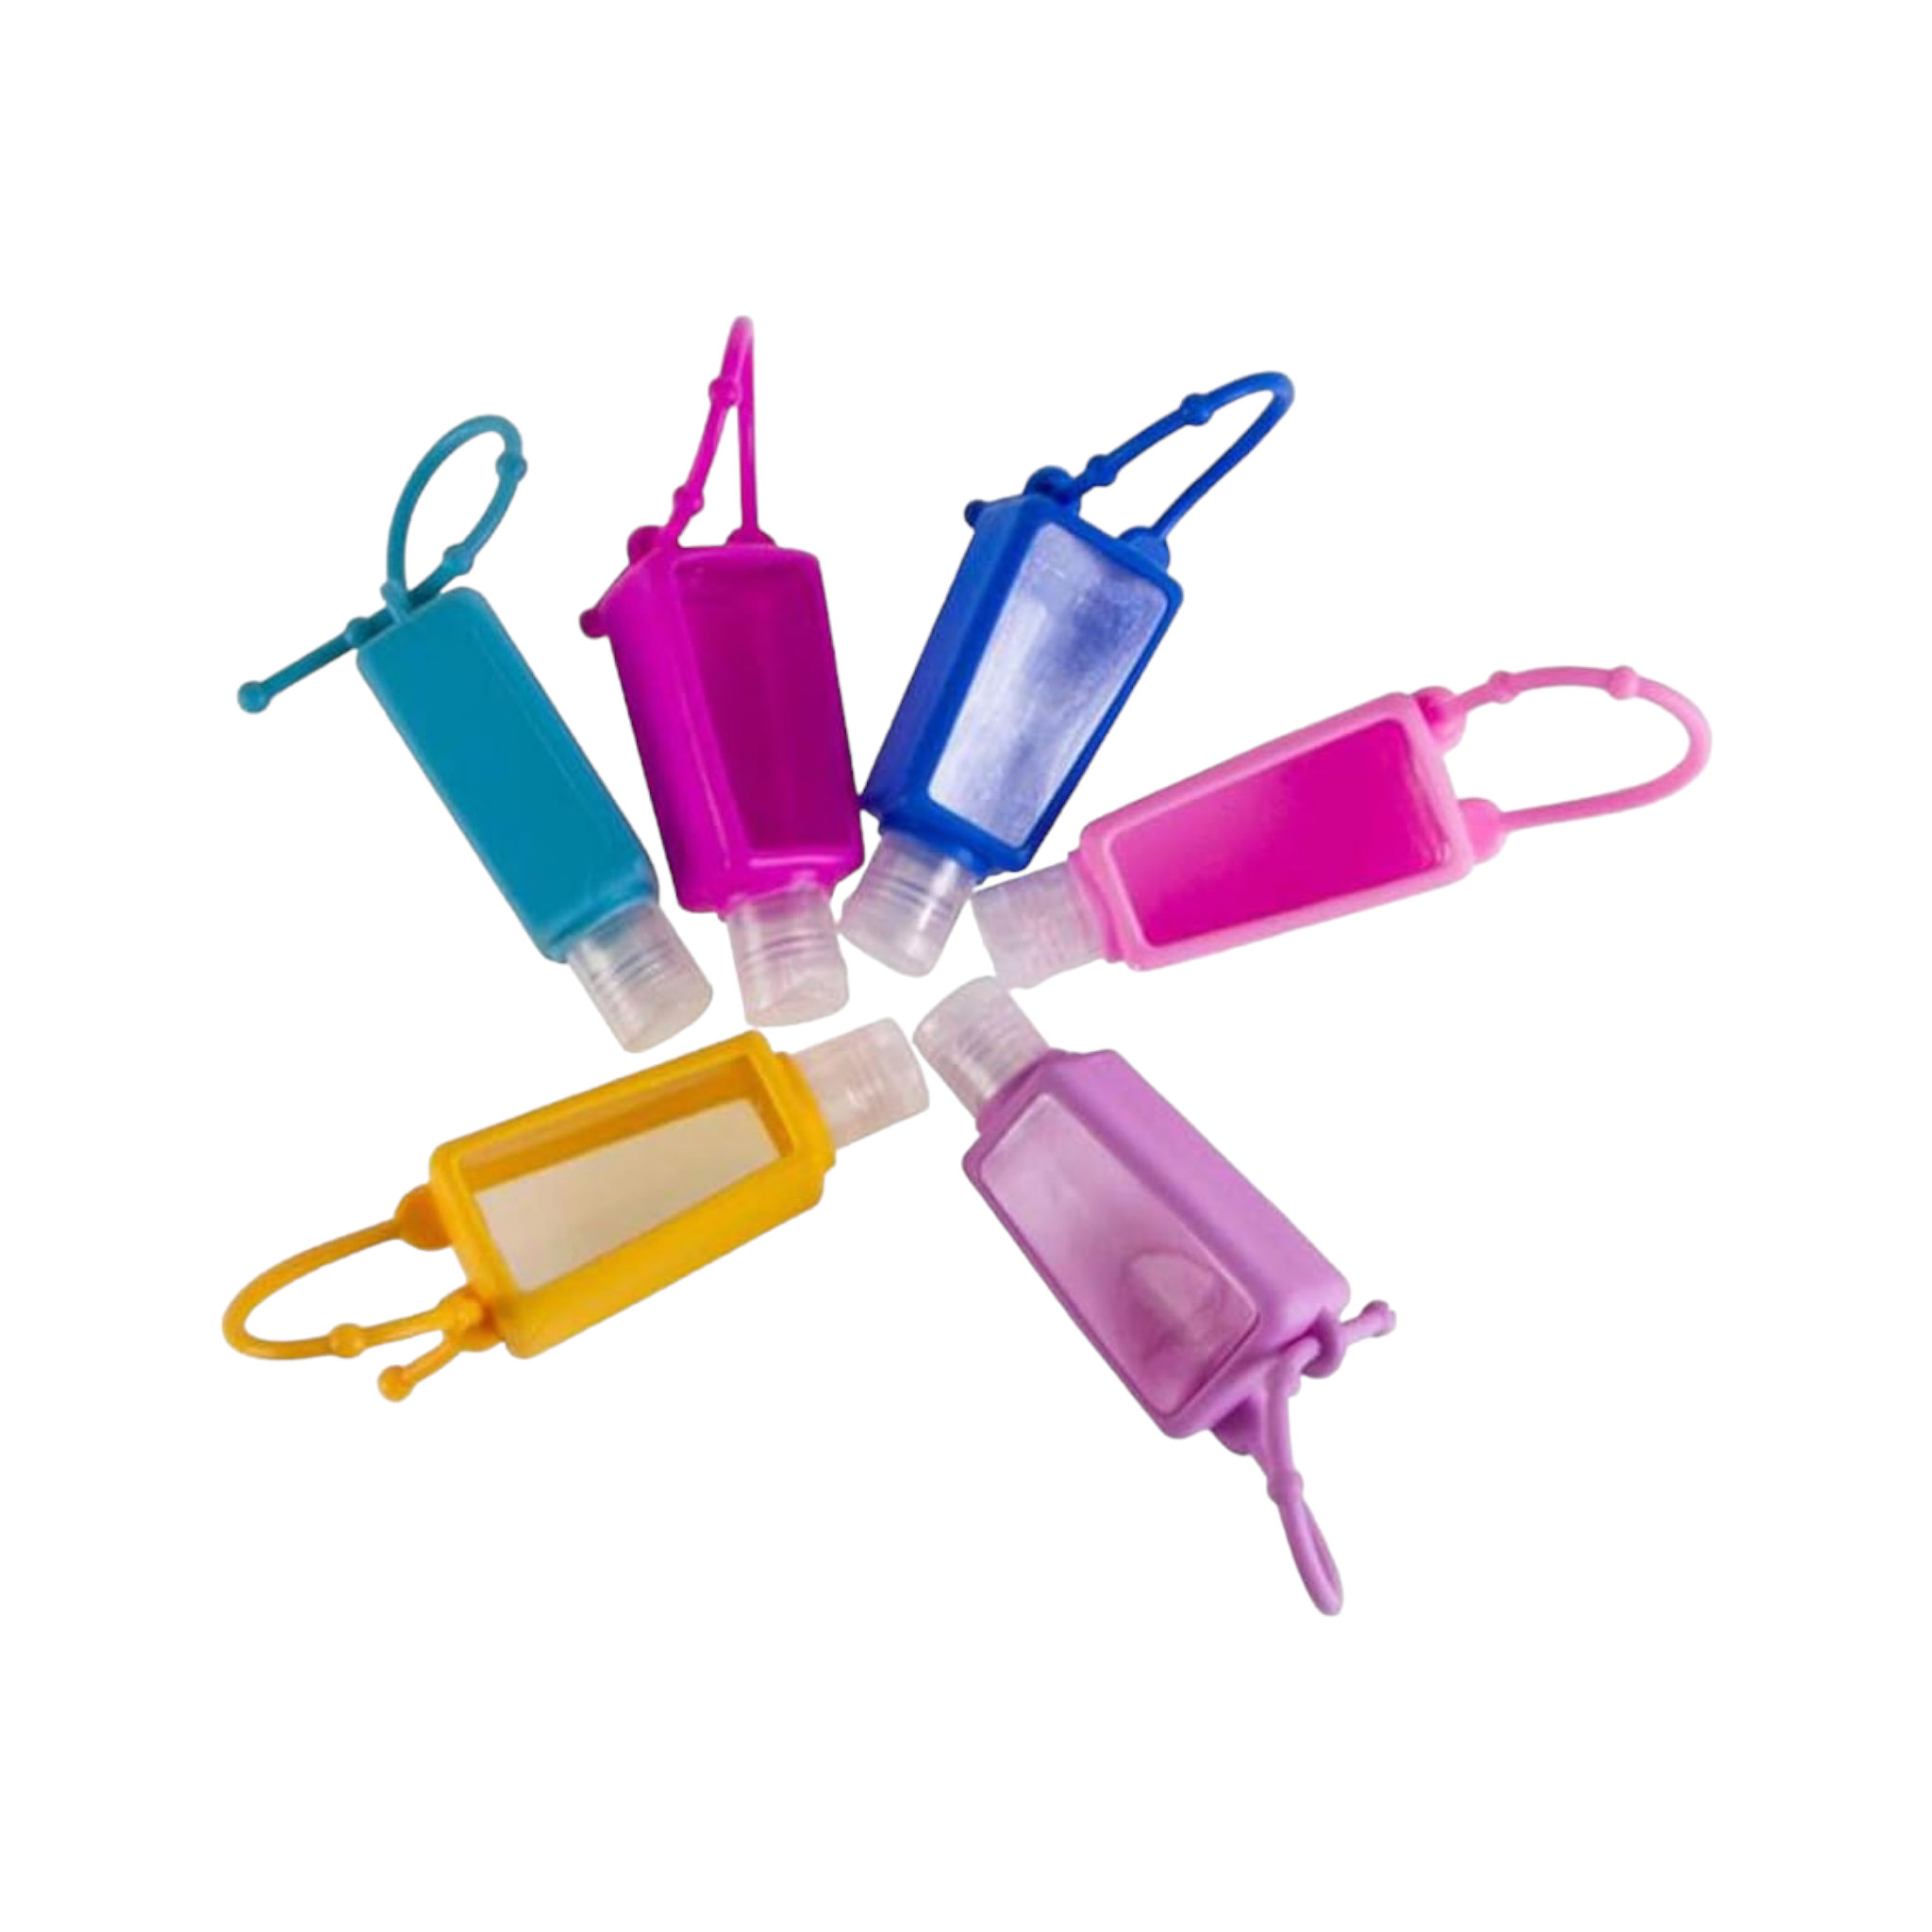 30ml Sanitizer Hand Travel Bottles with Silicone Sleeve